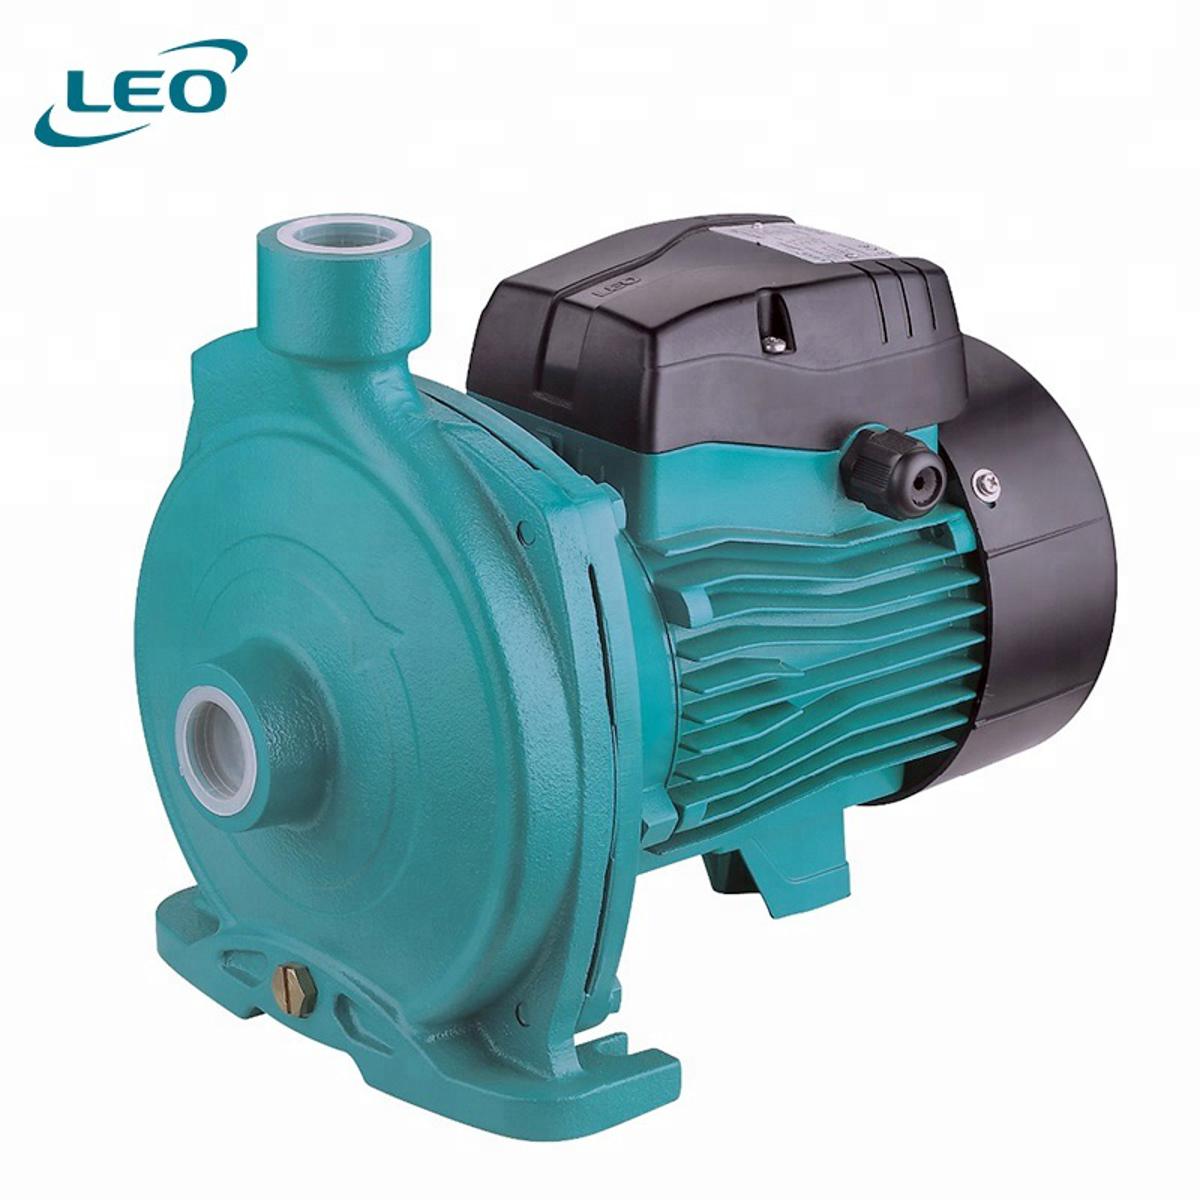 LEO - ACM-150- 1500 W - 2.0 HP- Clean Water Centrifugal Pump- 180V~220V SINGLE PHASE- SIZE:- 1.25" X 1"- ITALY Patent DESIGN European STANDARD